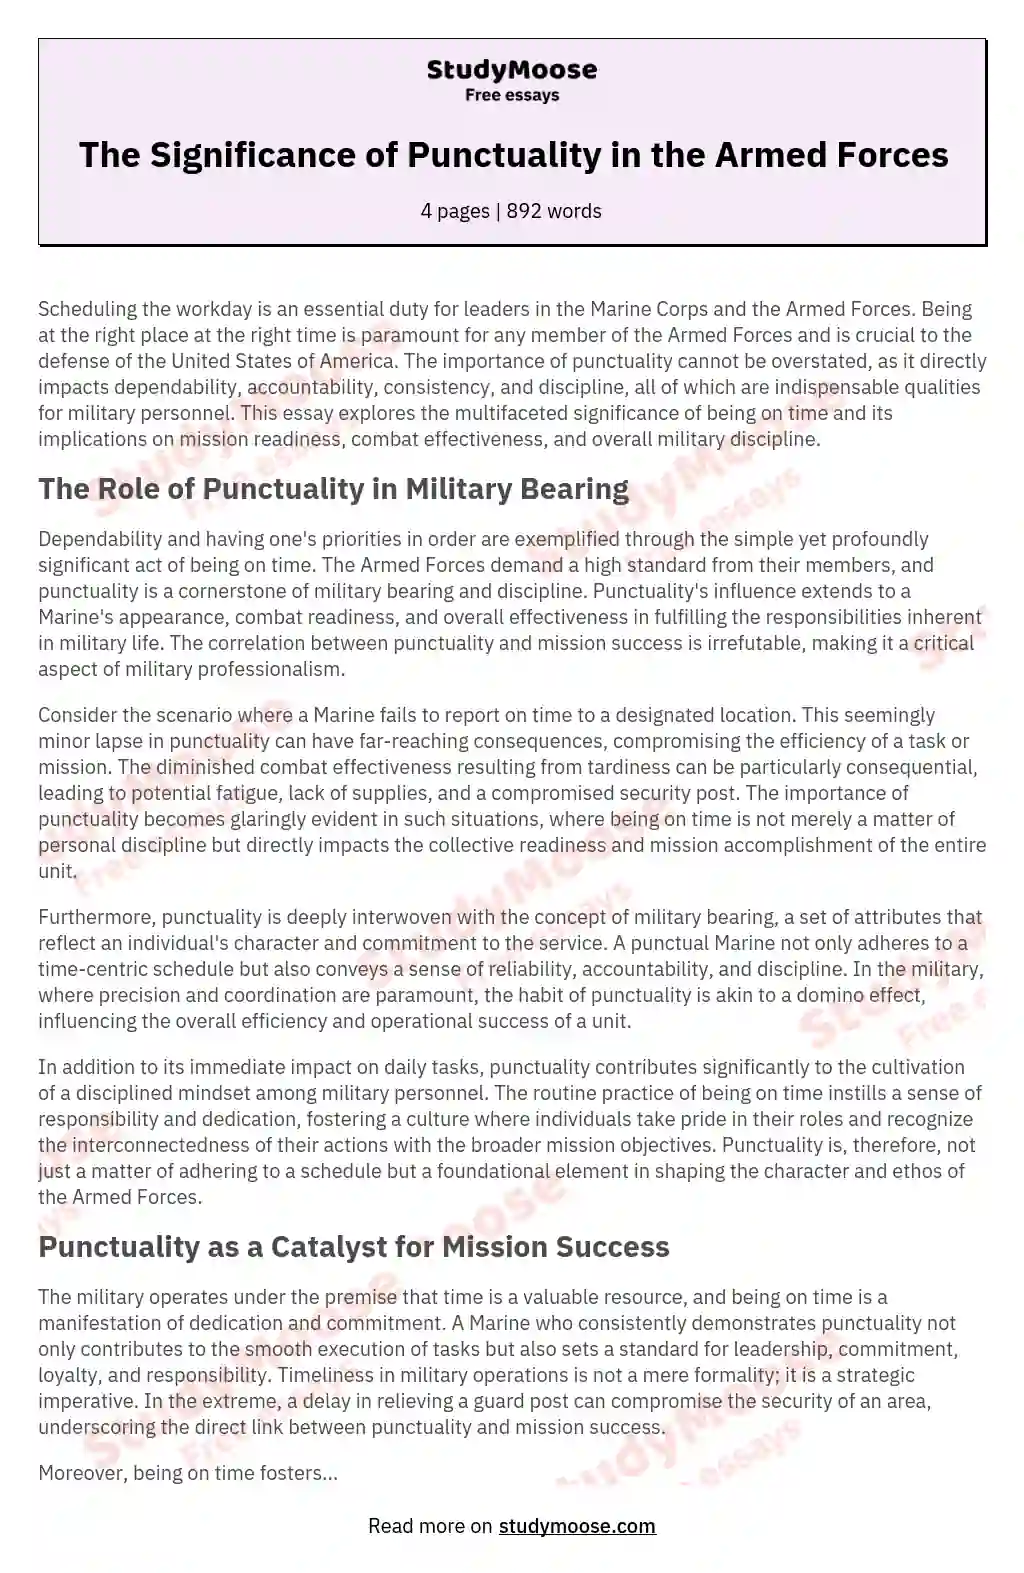 The Significance of Punctuality in the Armed Forces essay